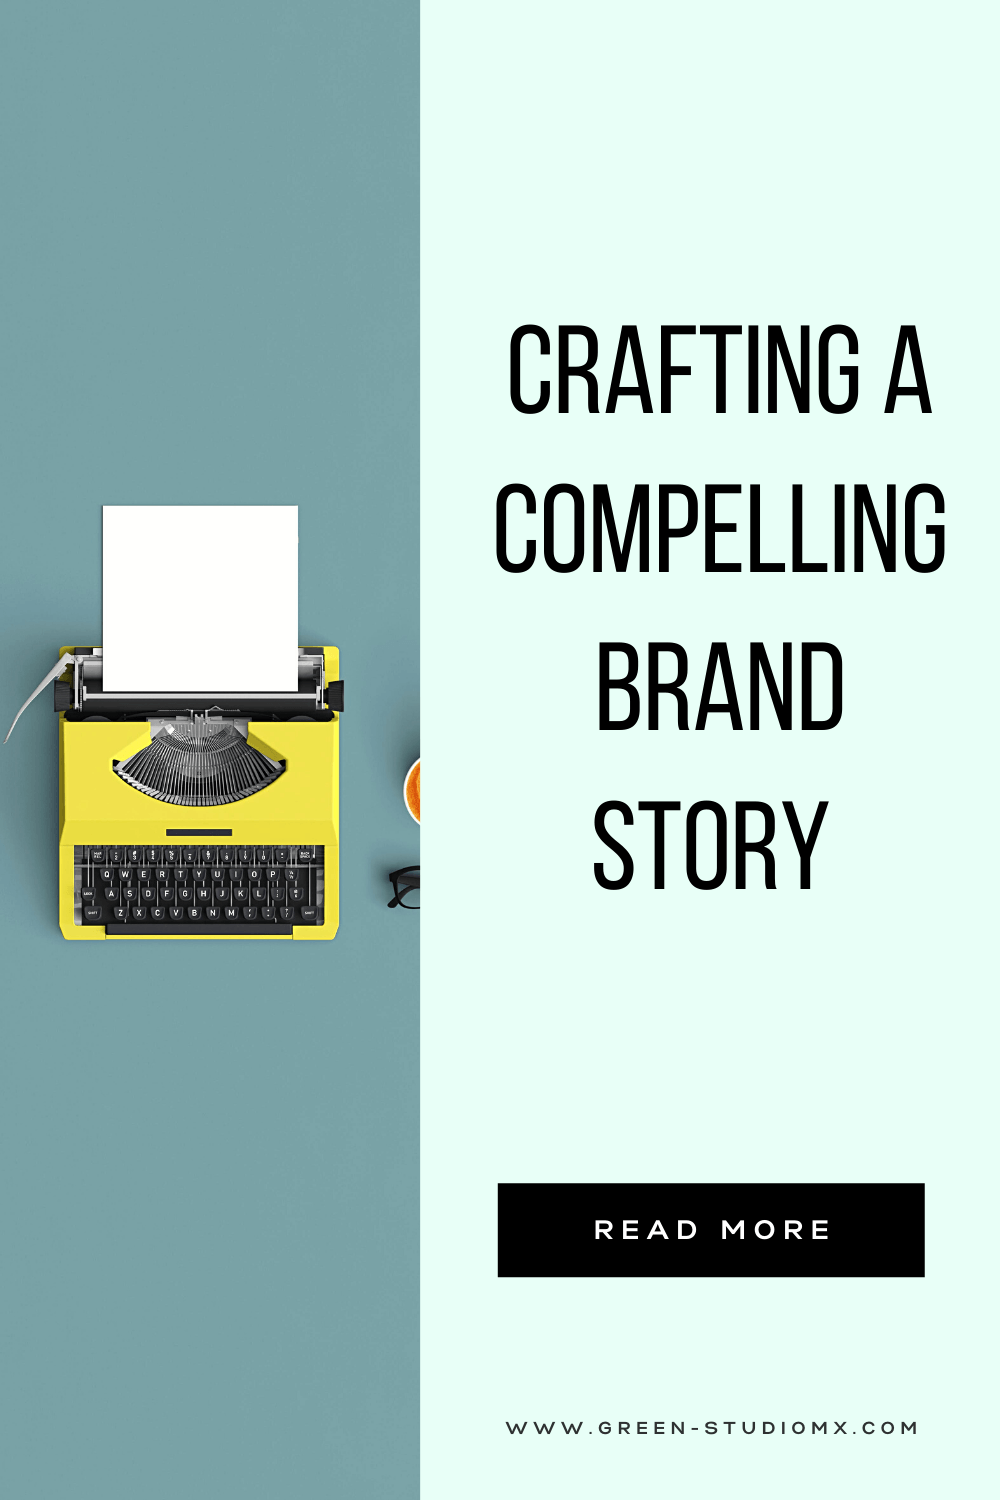 Crafting A Compelling Brand Story